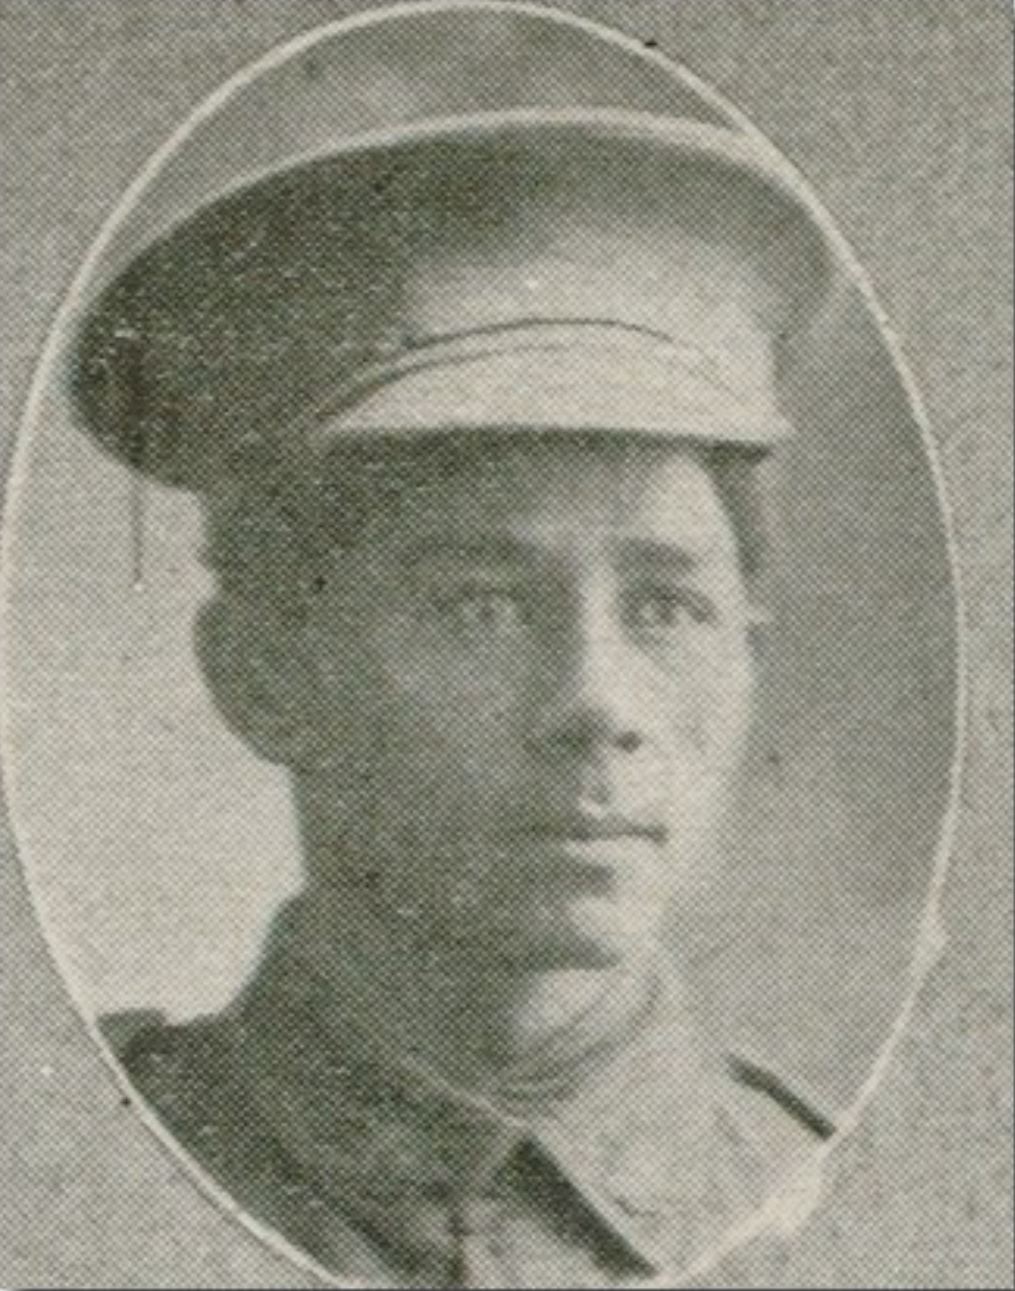 Photograph of William Ah See, son of Tom Ah See. Source: Photographs of 'A' Company, 41st Battalion by Fegan, The Queenslander, 29 July 1916.